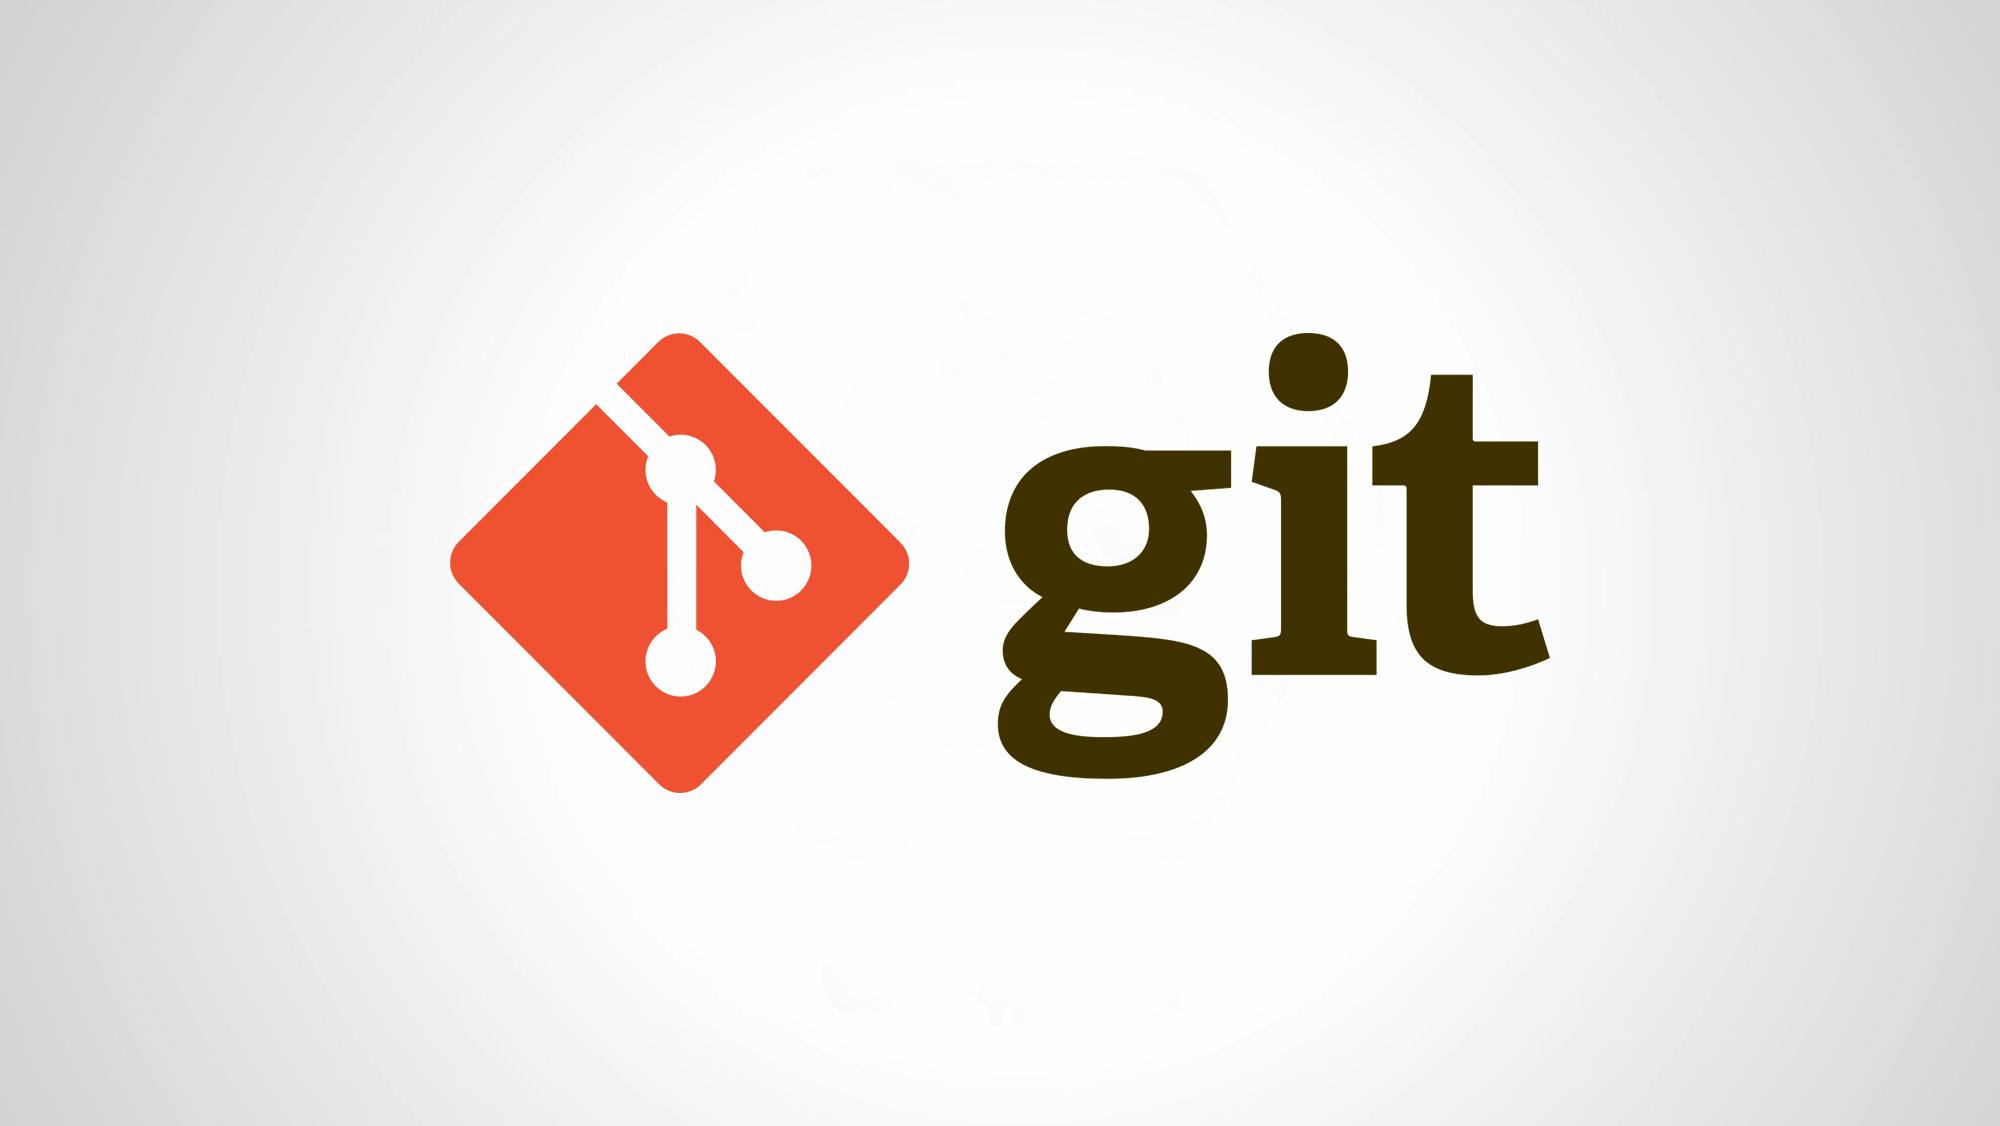 The Ultimate Git Course